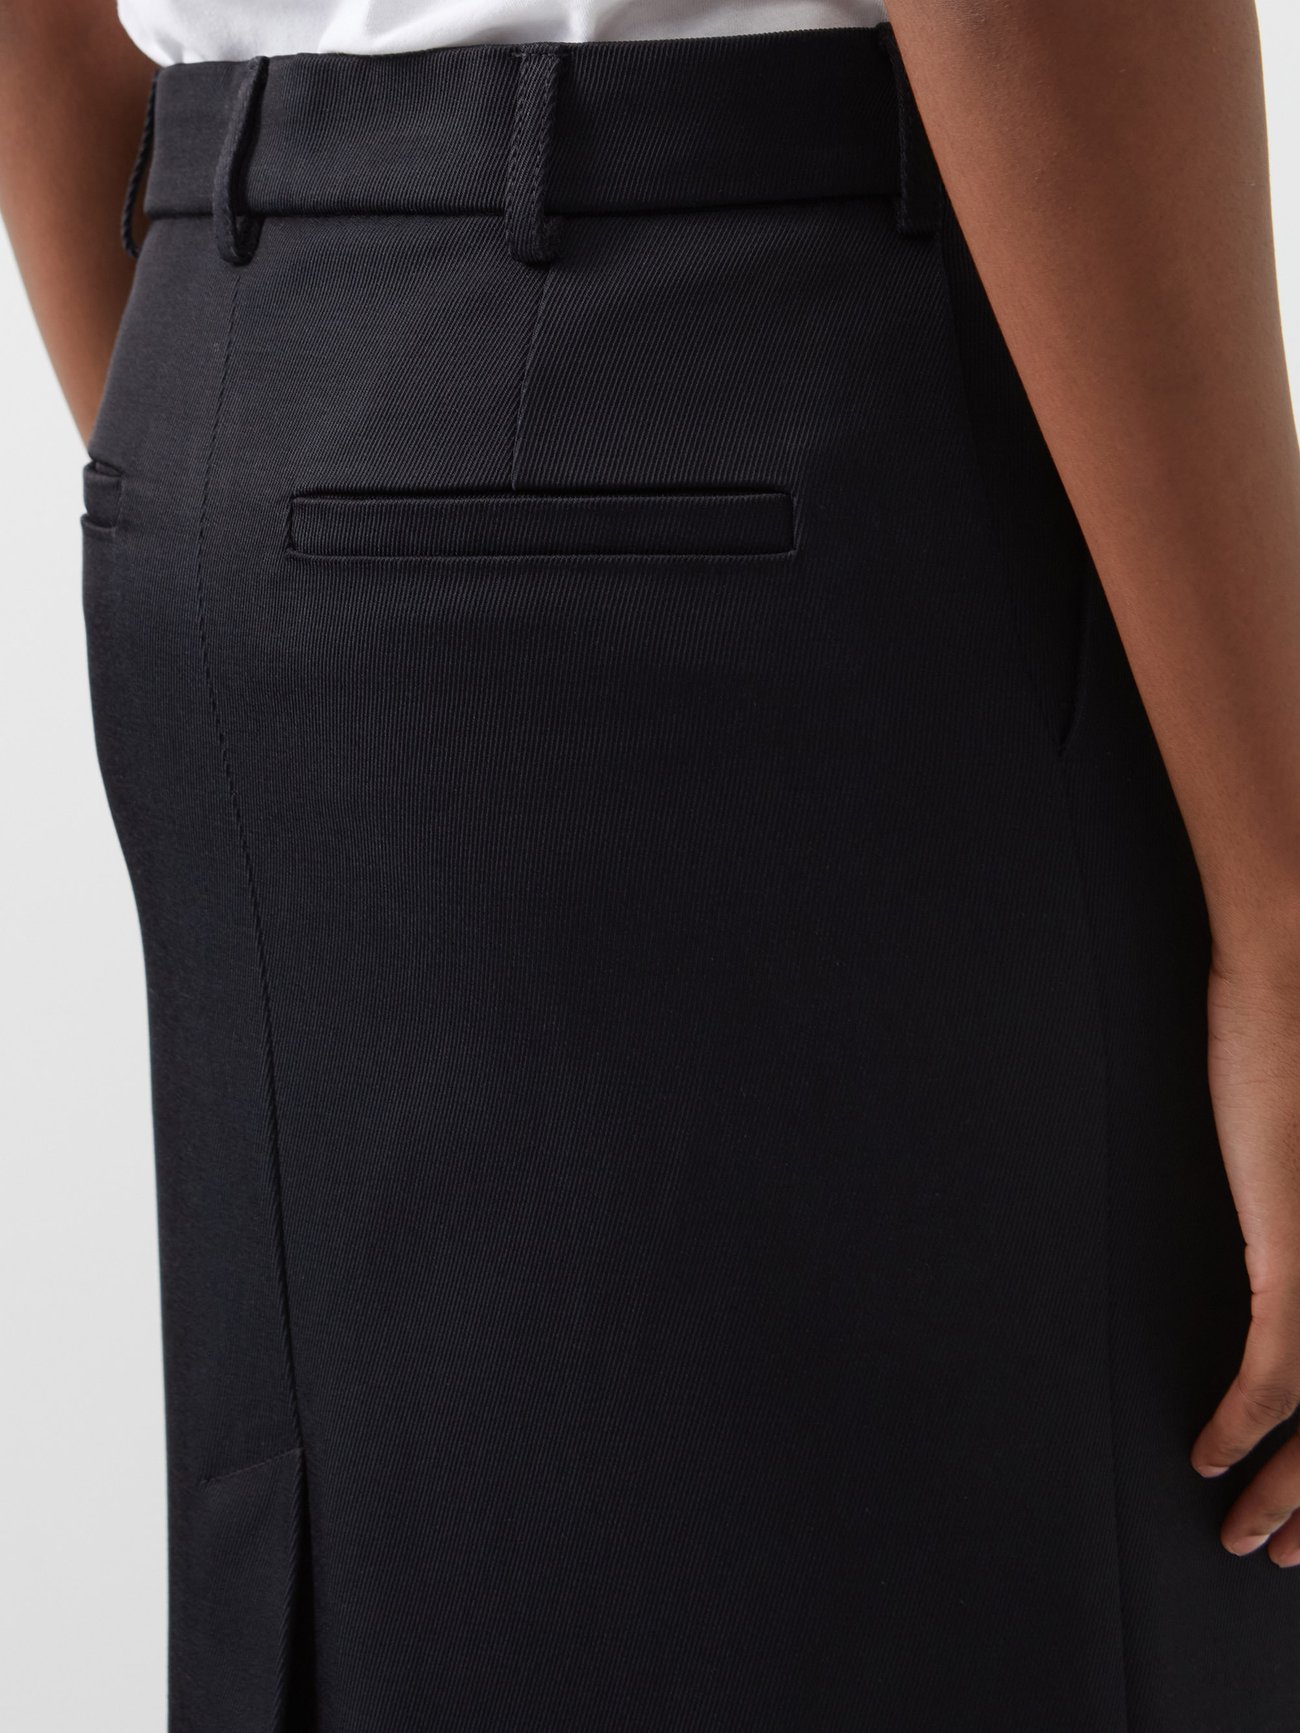 Raey’s navy maxi skirt captures the label’s minimalist sense of ease. It’s made in the UK from textured twill to a mid-rise silhouette with side pockets and falls to a straight fit with a hem slit enhancing movement.